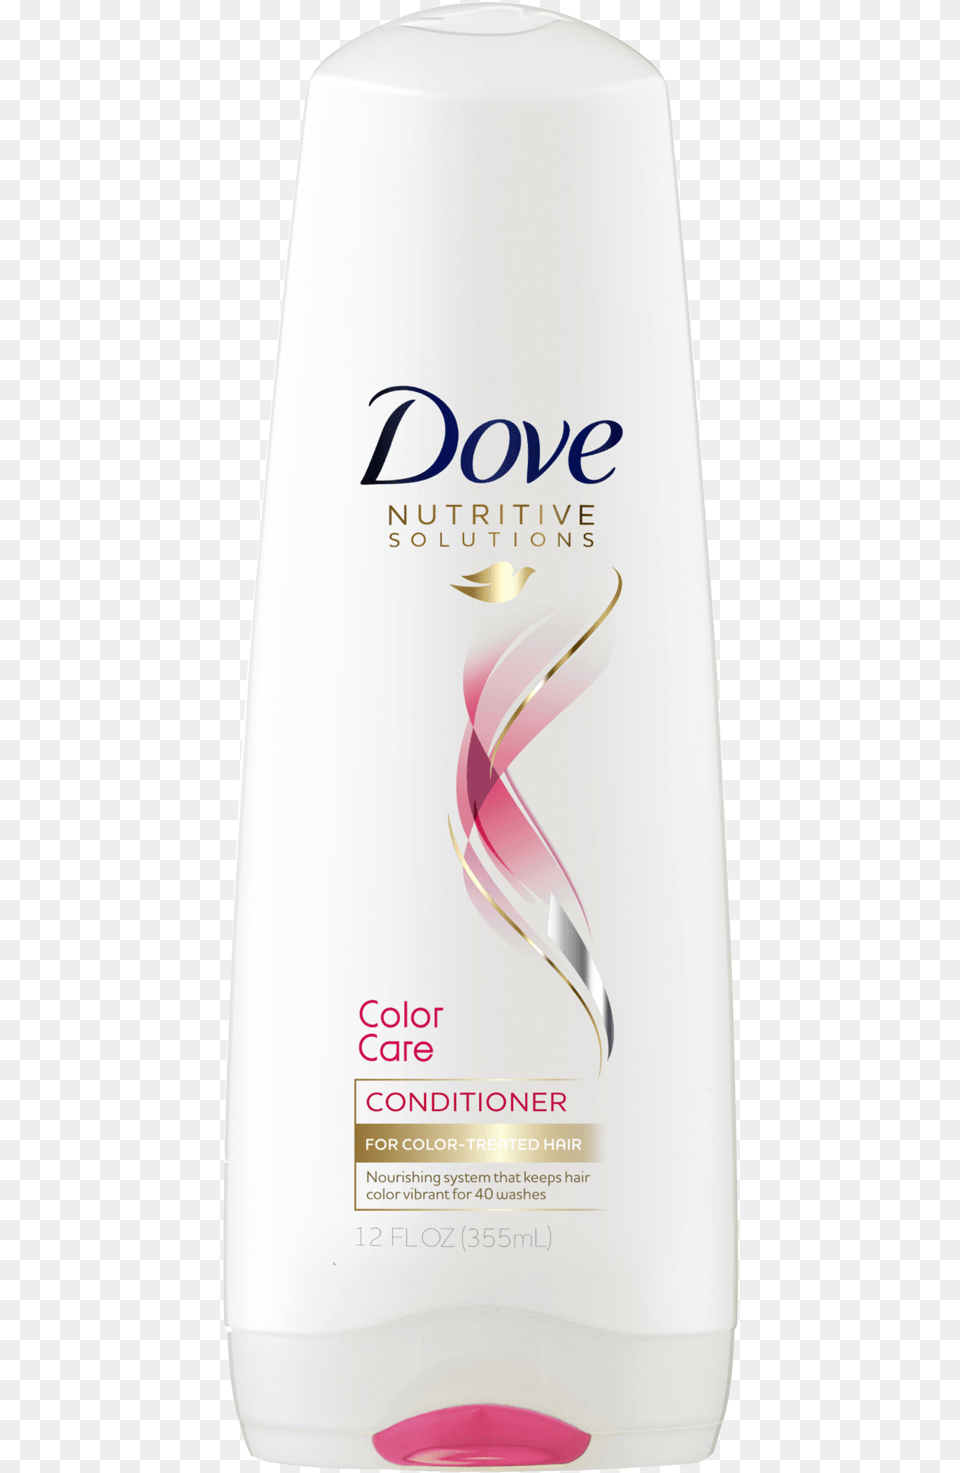 Dove Nutritive Solutions Color Care Conditioner 12 Dove Hair Fall Rescue Conditioner, Bottle, Cosmetics, Can, Tin Free Png Download